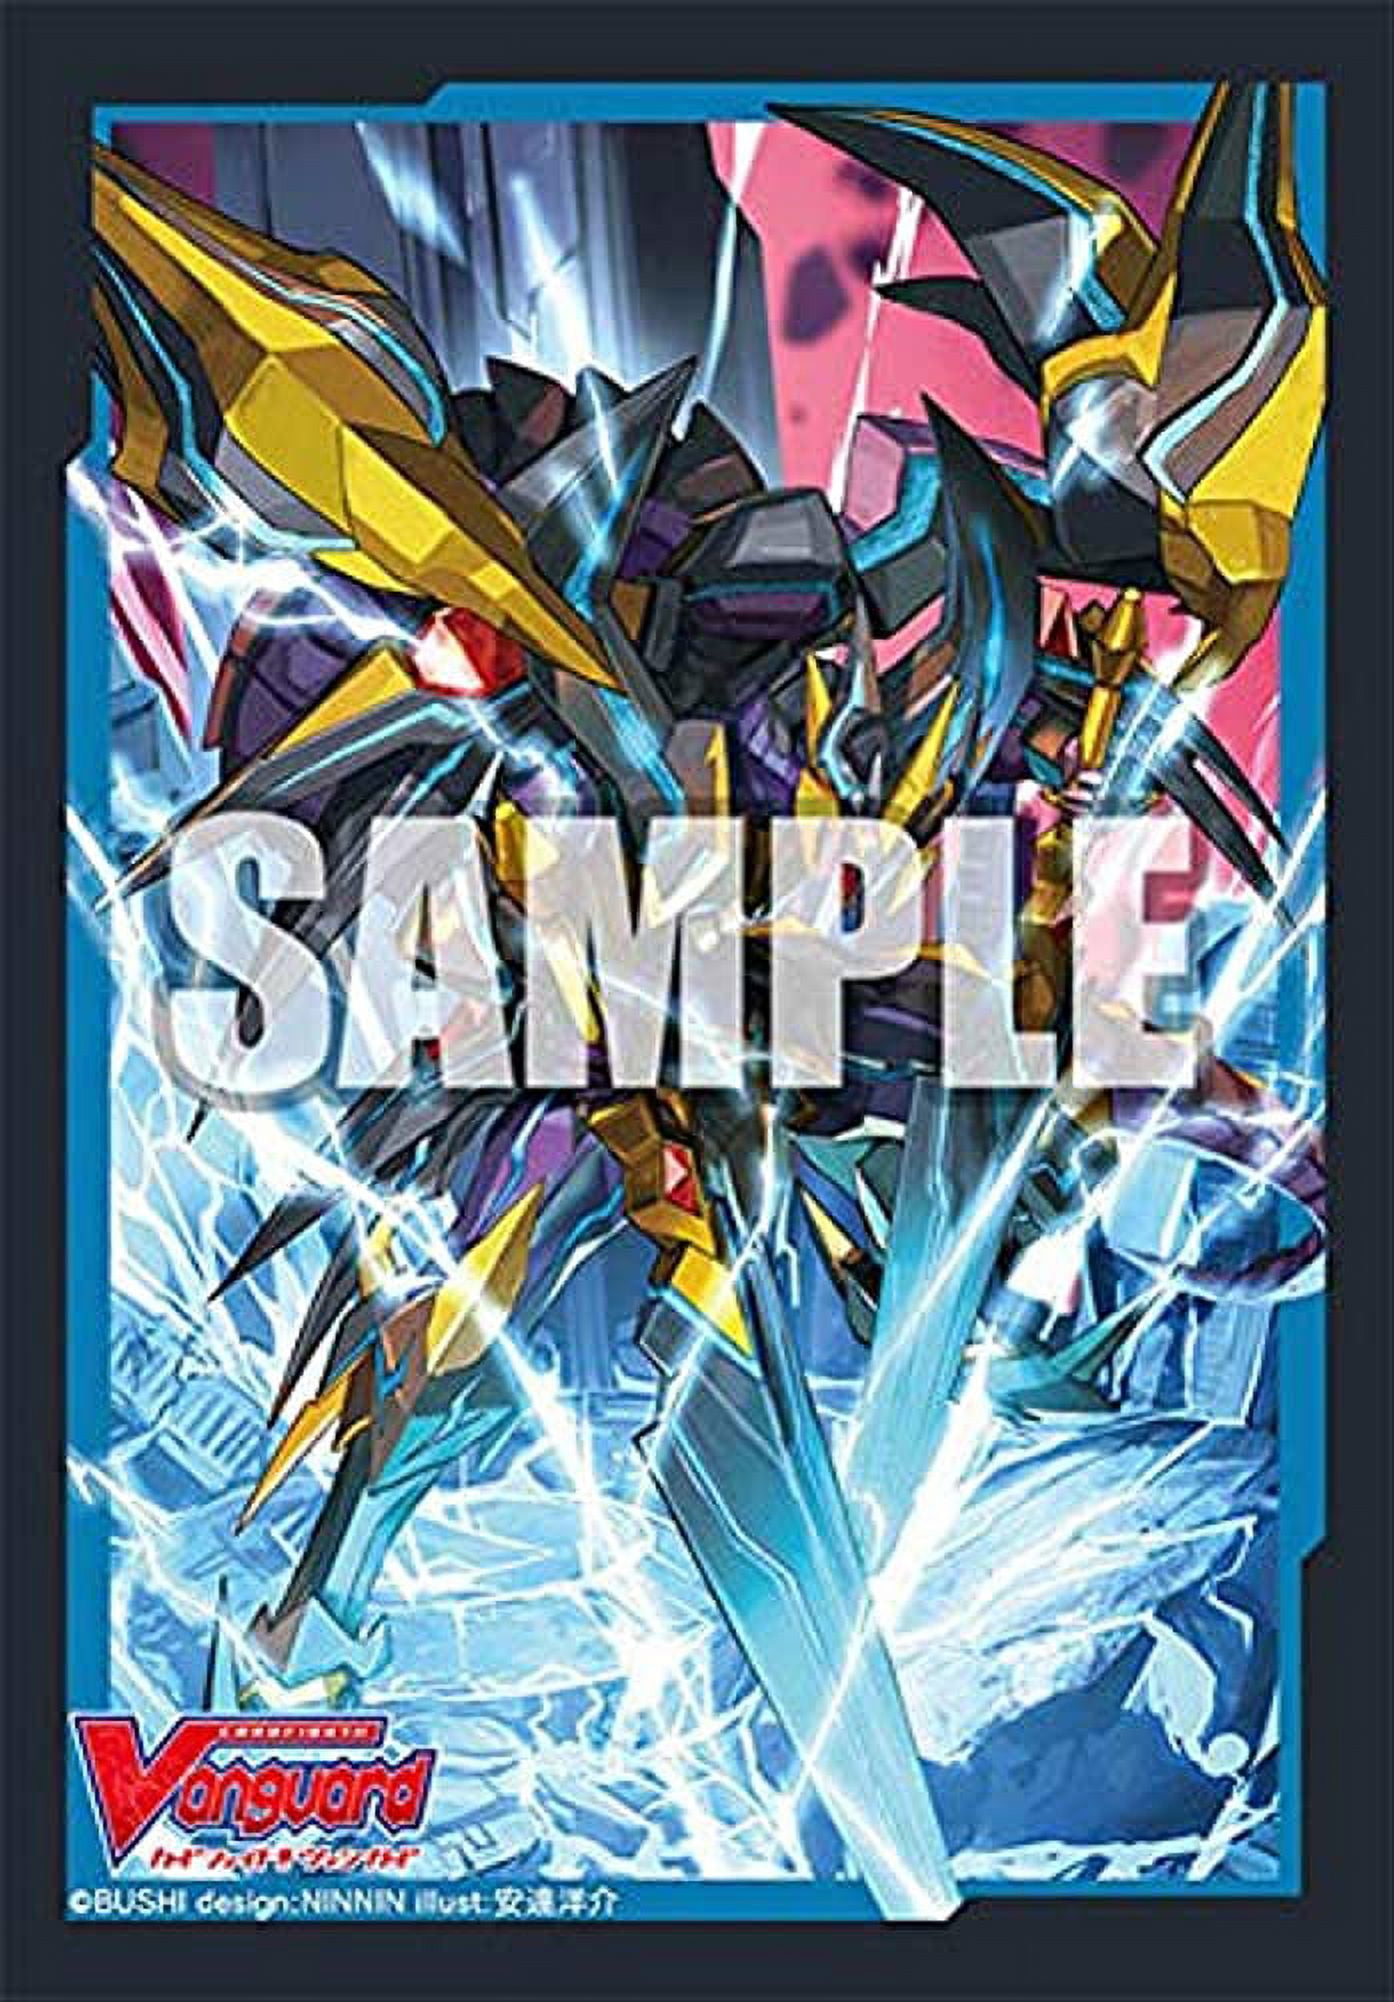  TitanShield (150 Sleeve/Black) Small Japanese Sized Trading  Card Sleeves Deck Protector Compatible with Yu-Gi-Oh, Cardfight!! Vanguard  & Photocards : Toys & Games